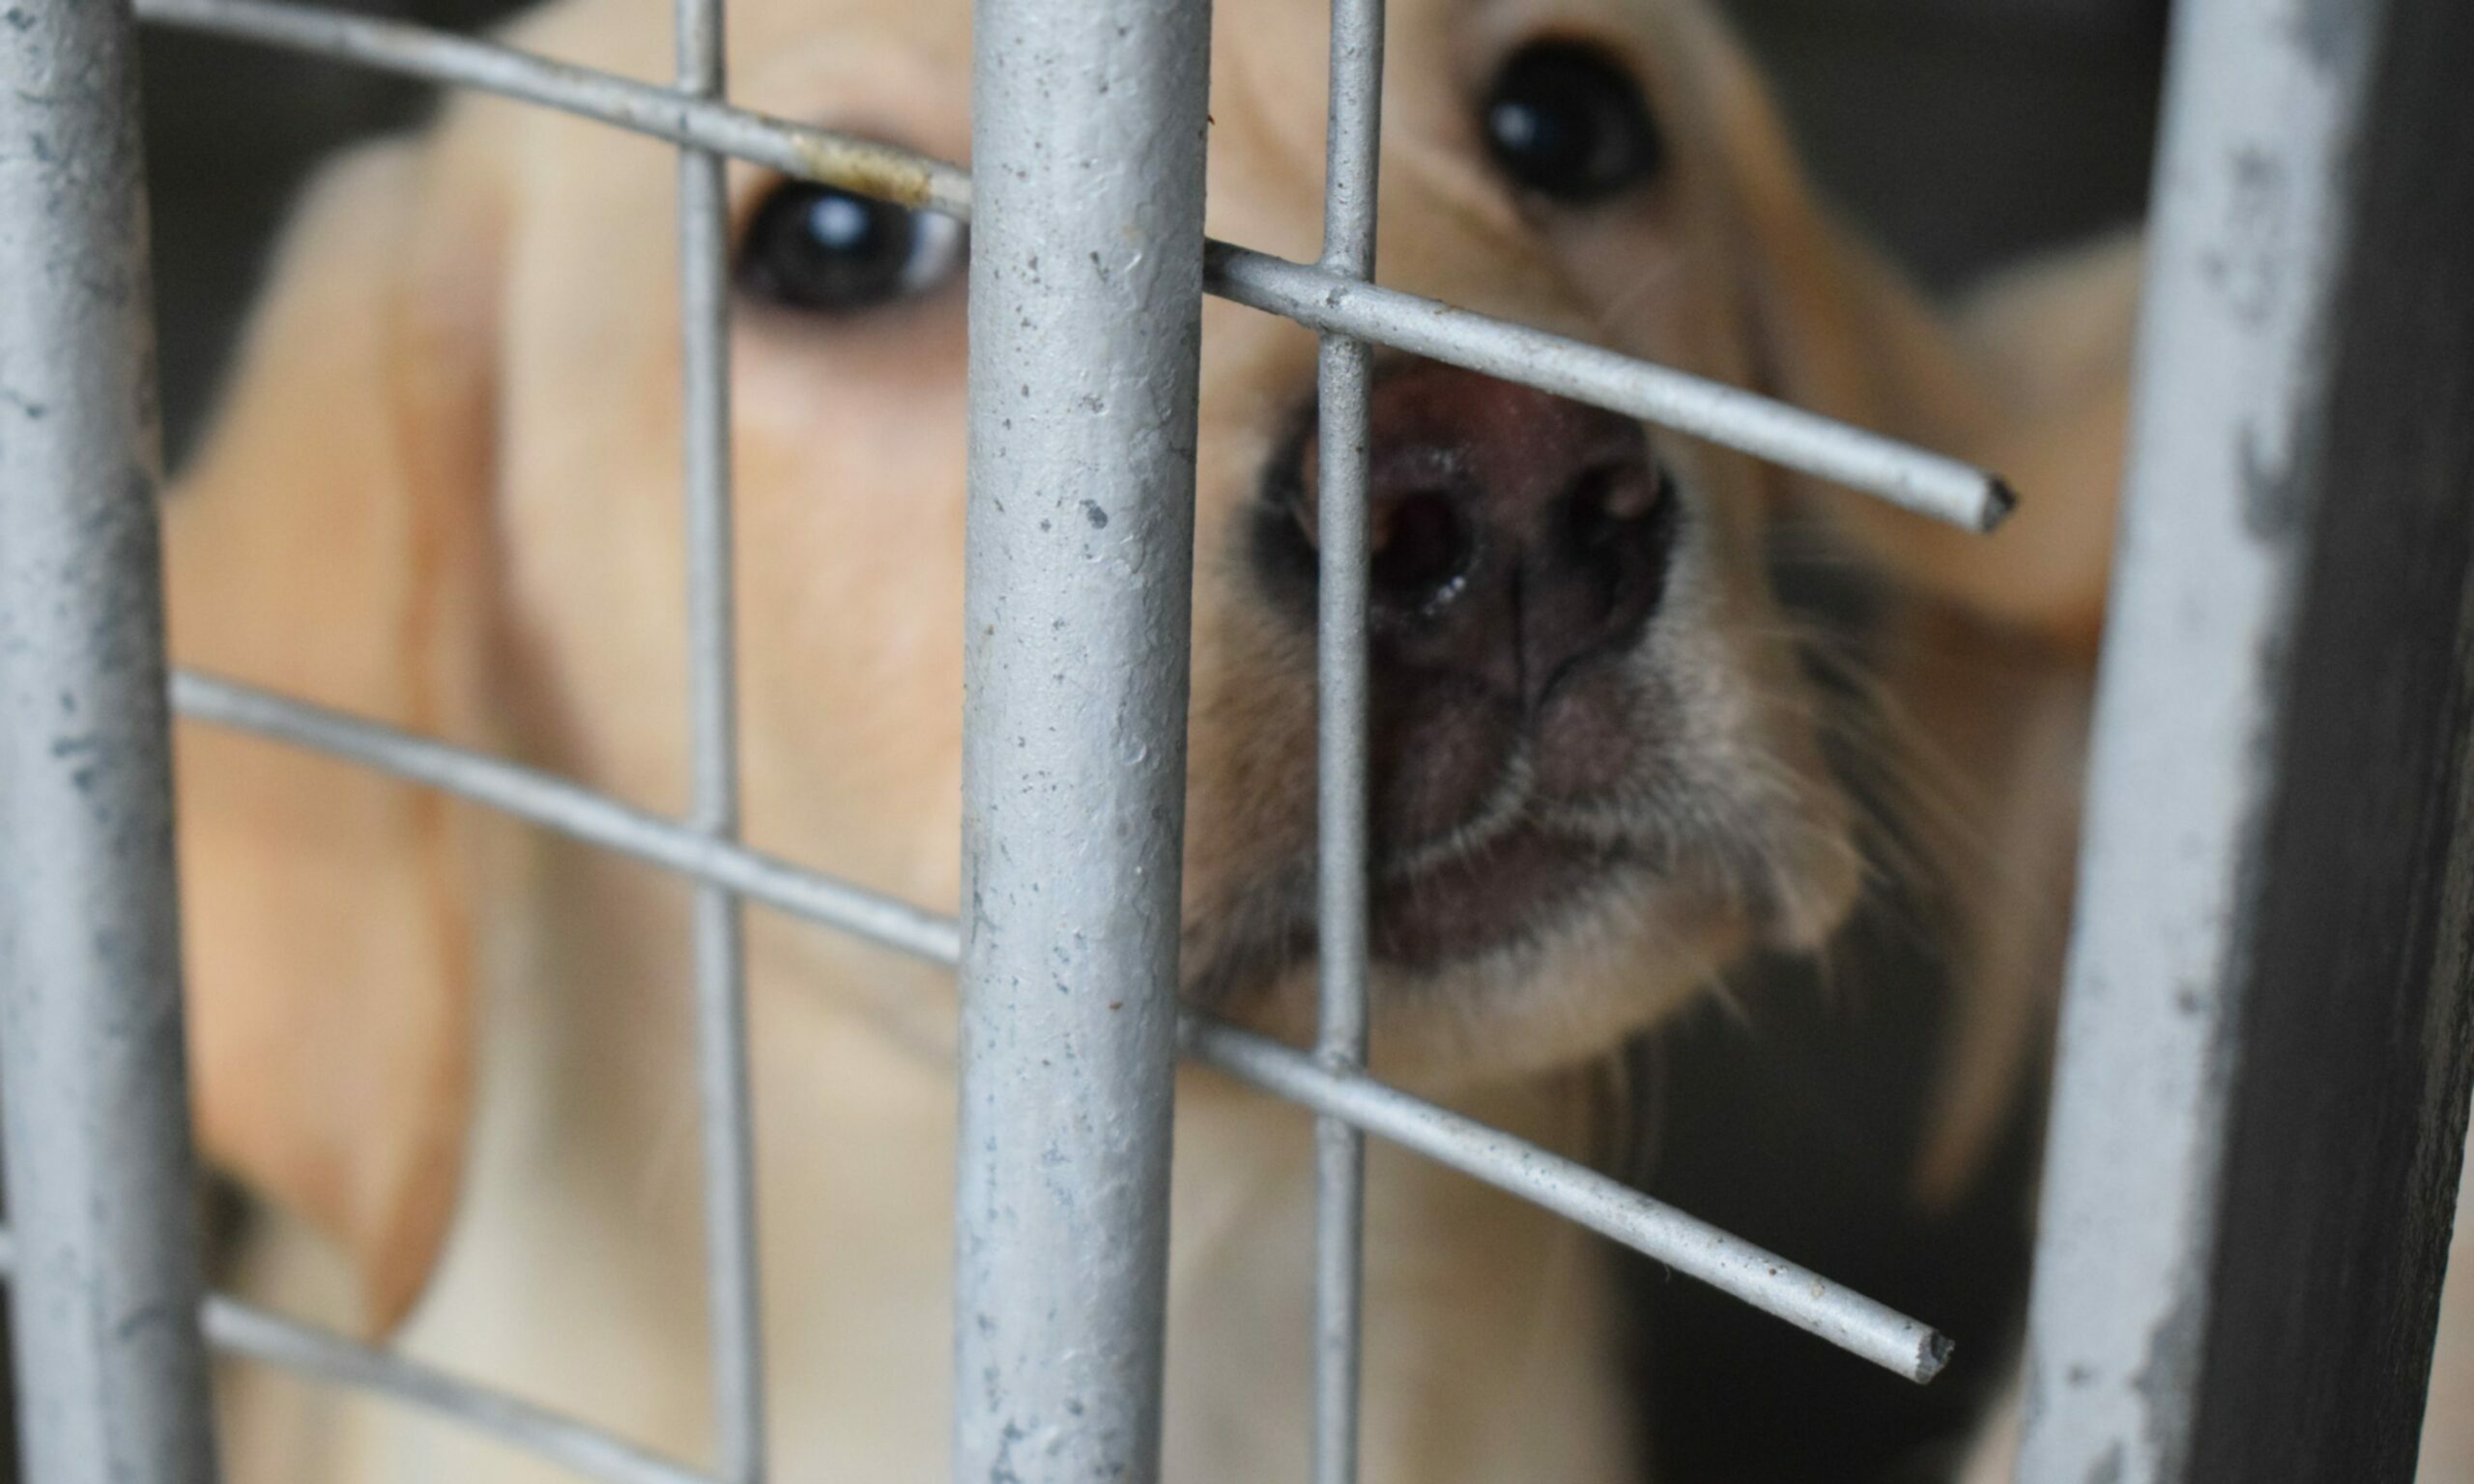 More than 60 dogs and puppies were seized during the raid at the Hessin family's farm.